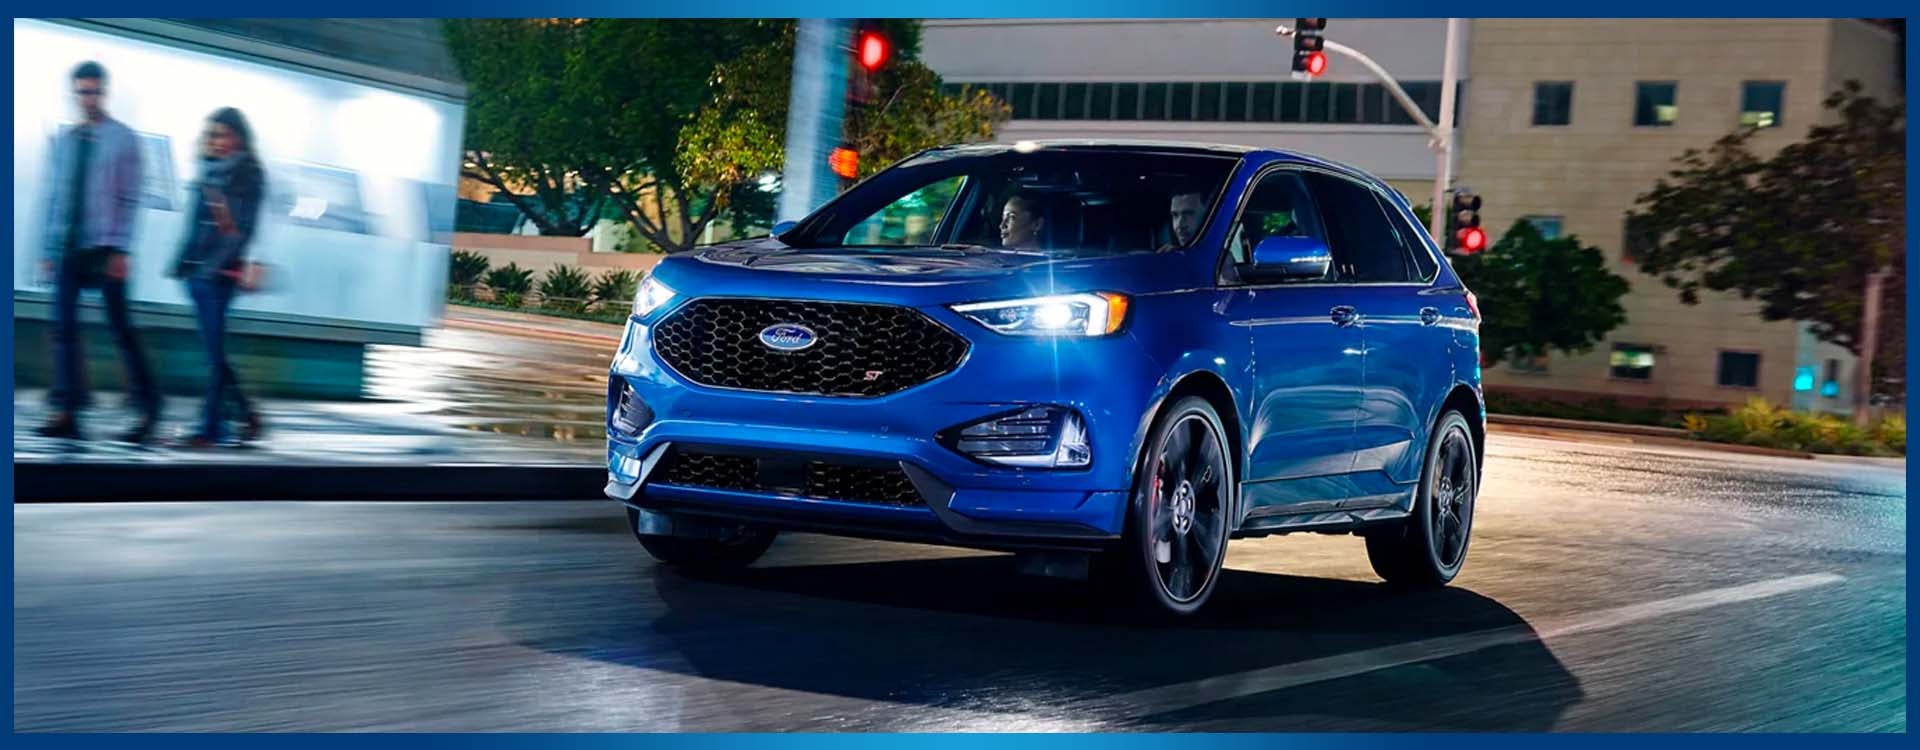 2021 Ford Edge | Lewes, Delaware | Configurations & Specs